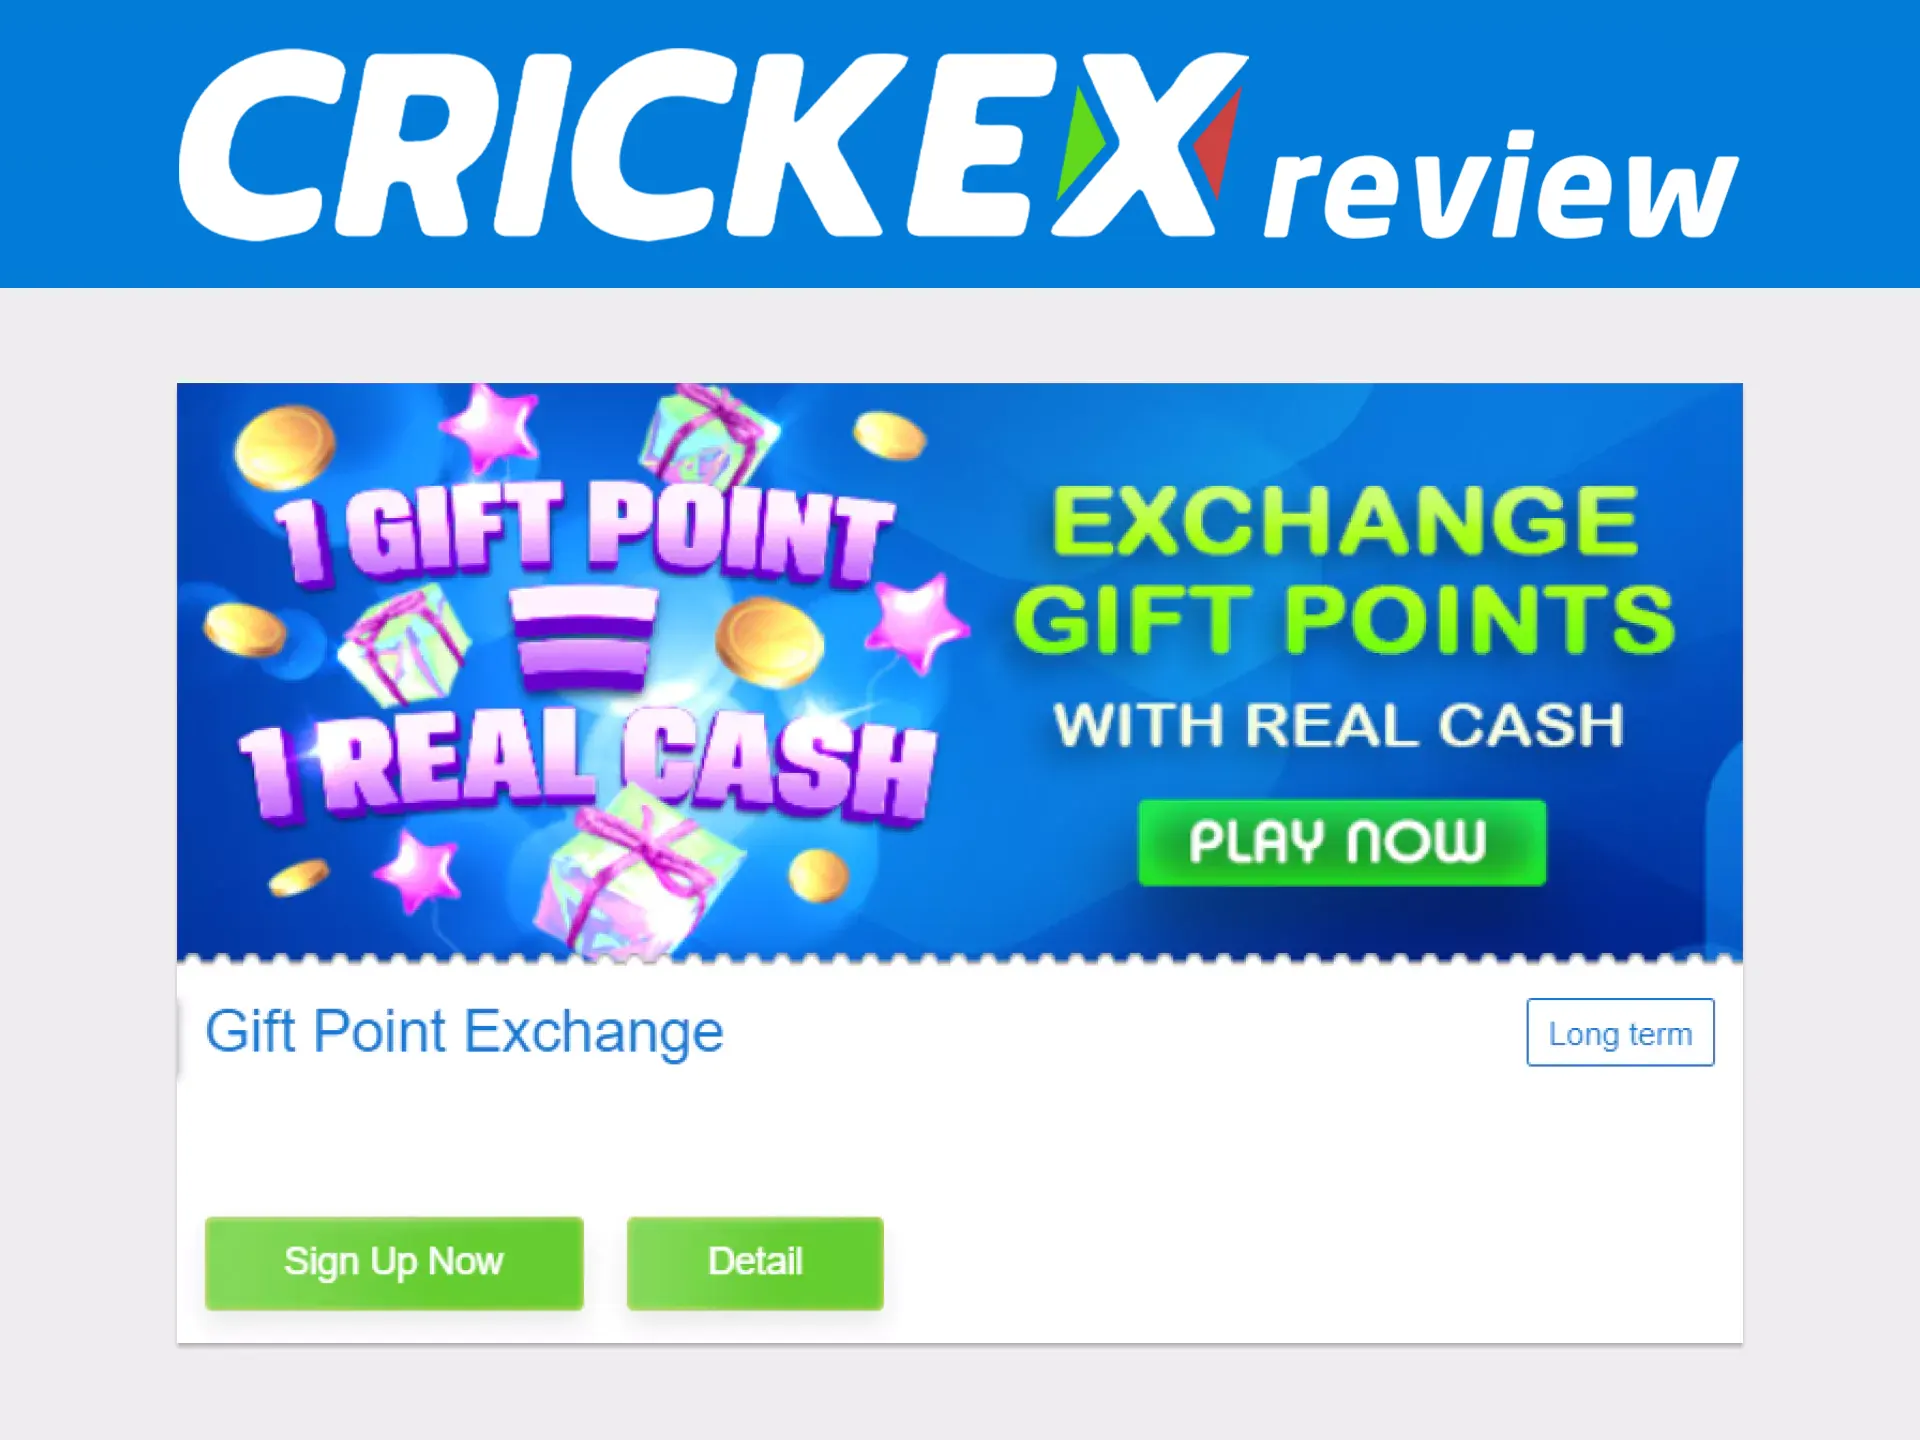 Get special gift points from Crickex.